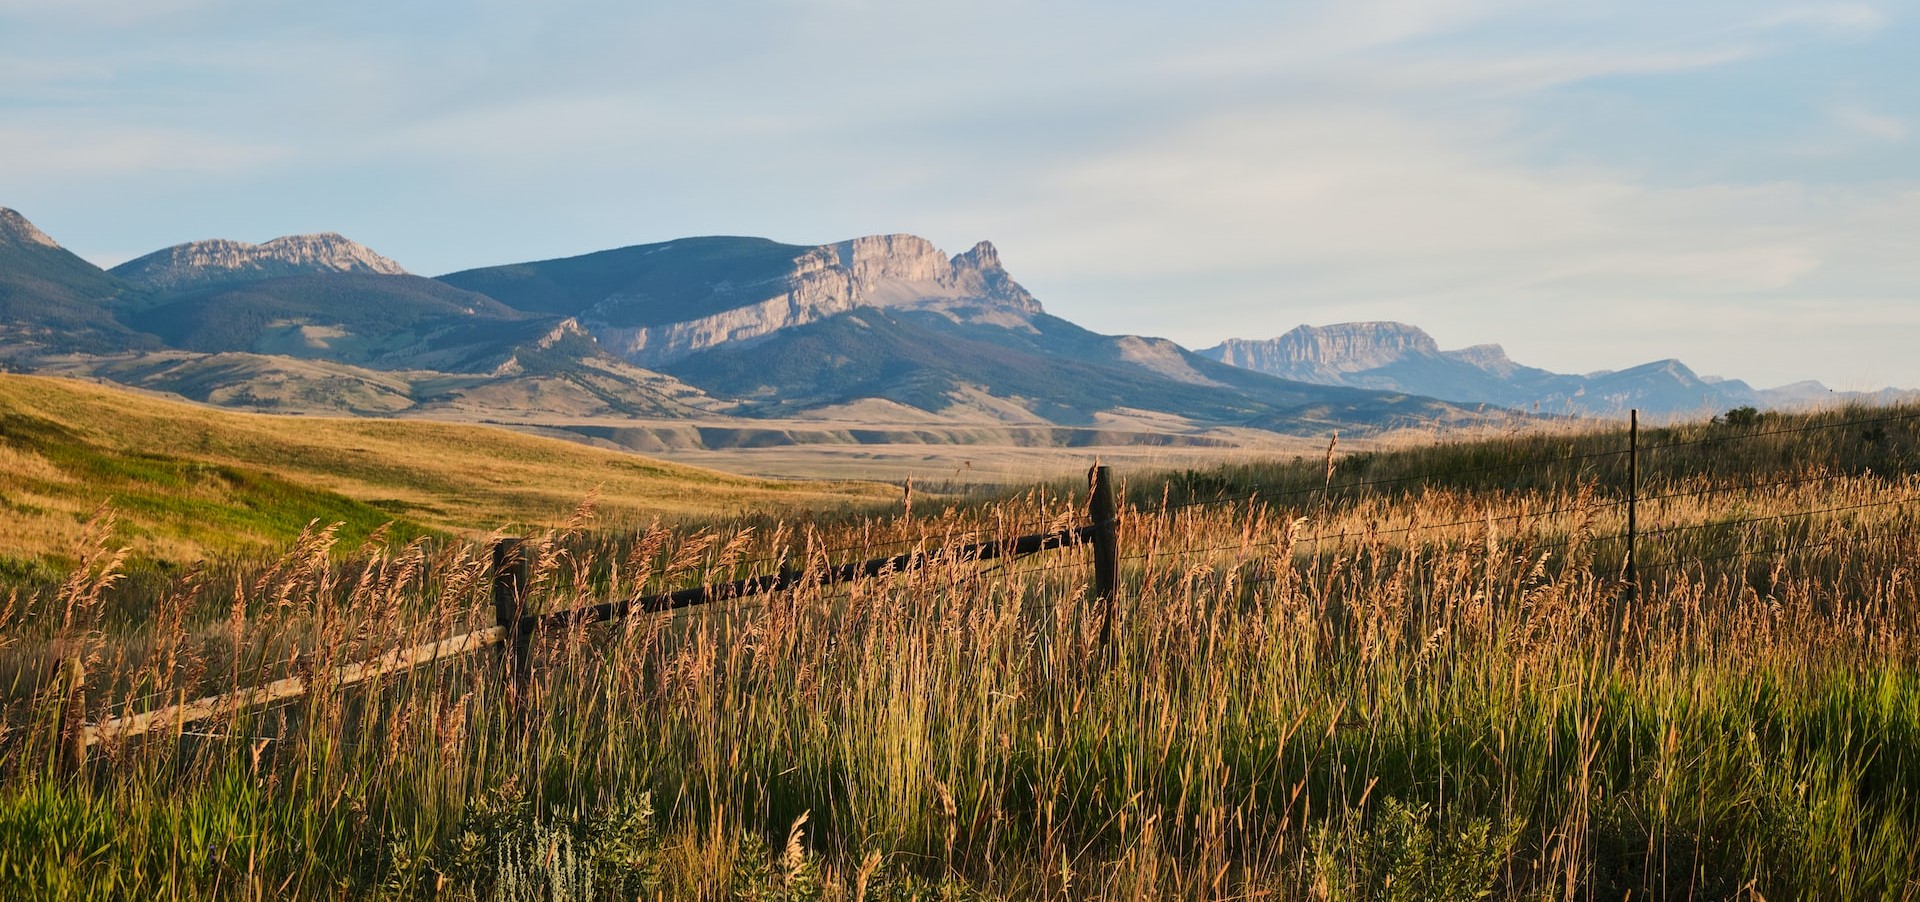 early morning in the Montana plains looking at Sawtooth Ridge and Castle Reef | Kids Car Donations